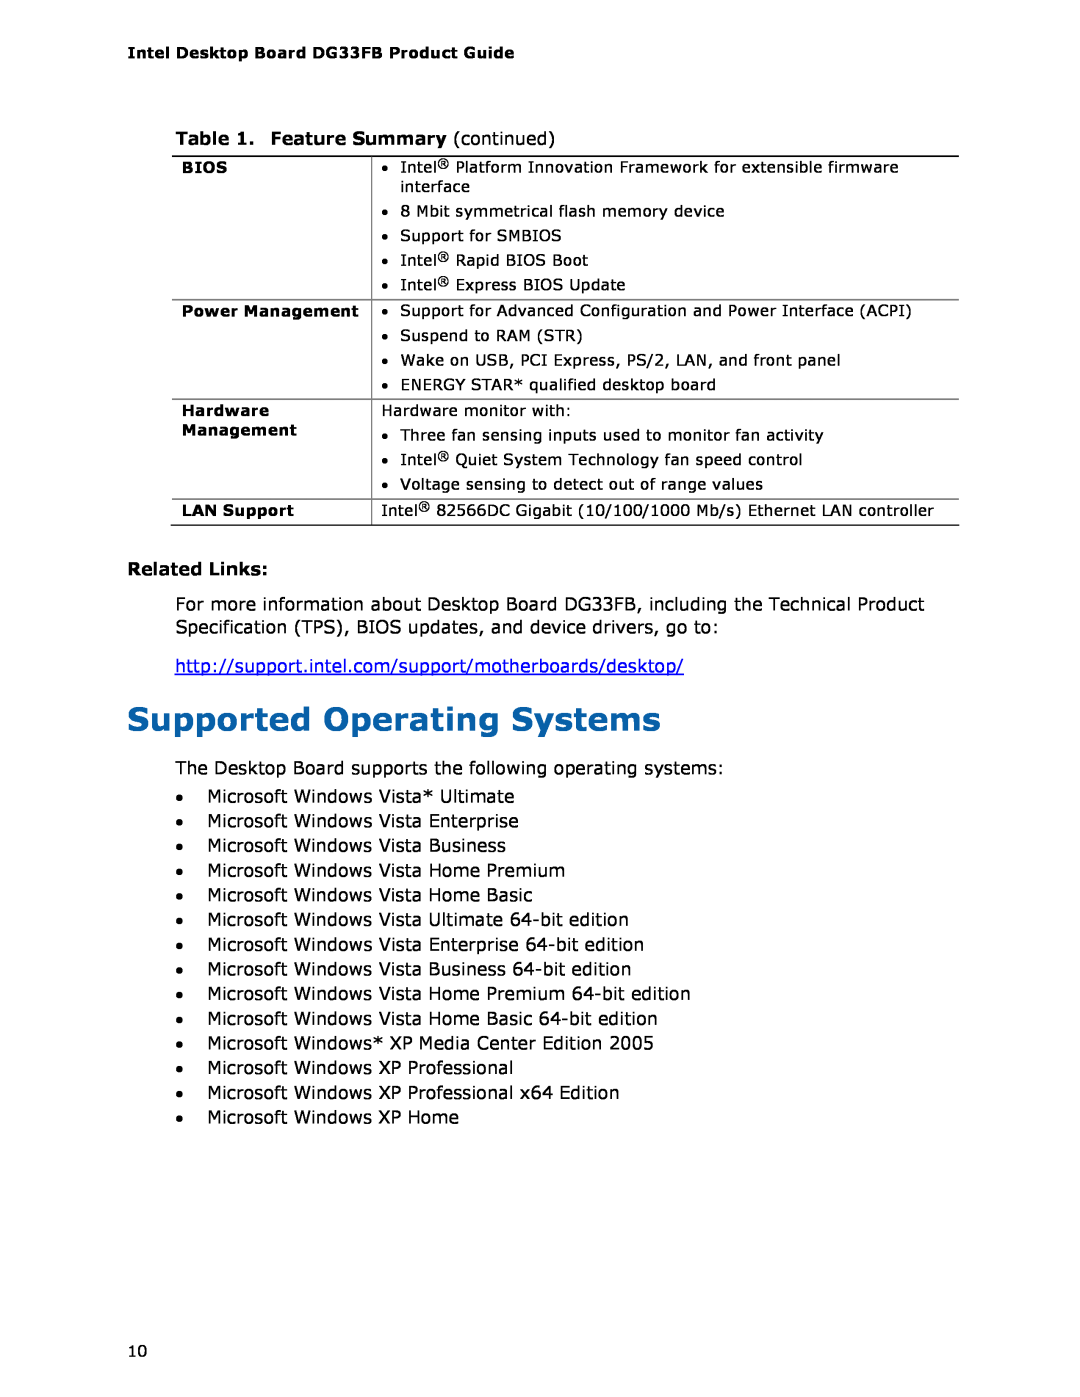 Intel DG33FB manual Supported Operating Systems, Feature Summary continued, Related Links 